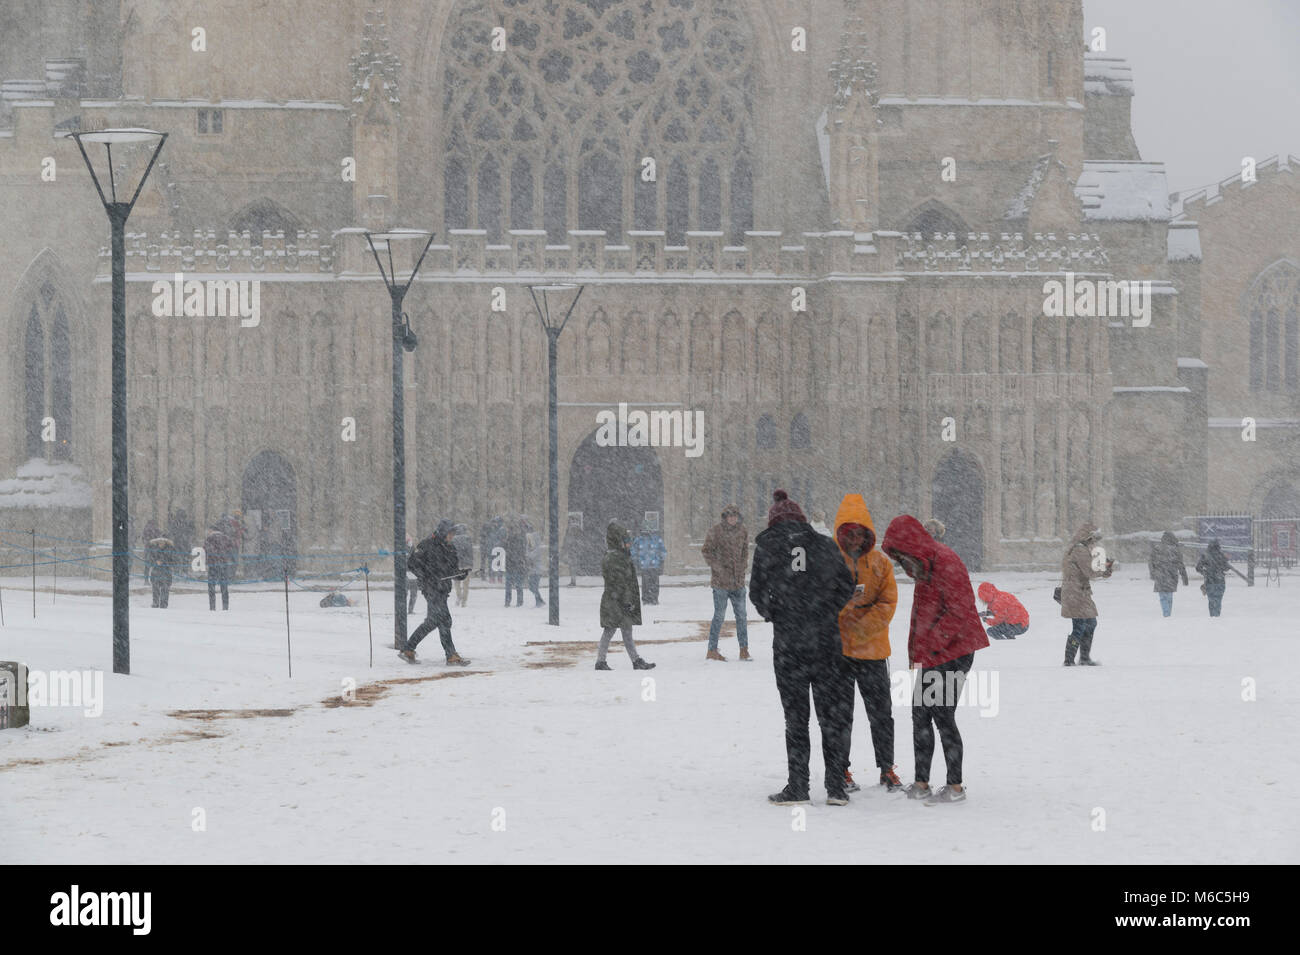 Exeter, Devon, UK. March 1st 2018. The Beast from the East meets Storm Emma in Exeter as a red weather warning is issued. People enjoy the snow outsid Stock Photo